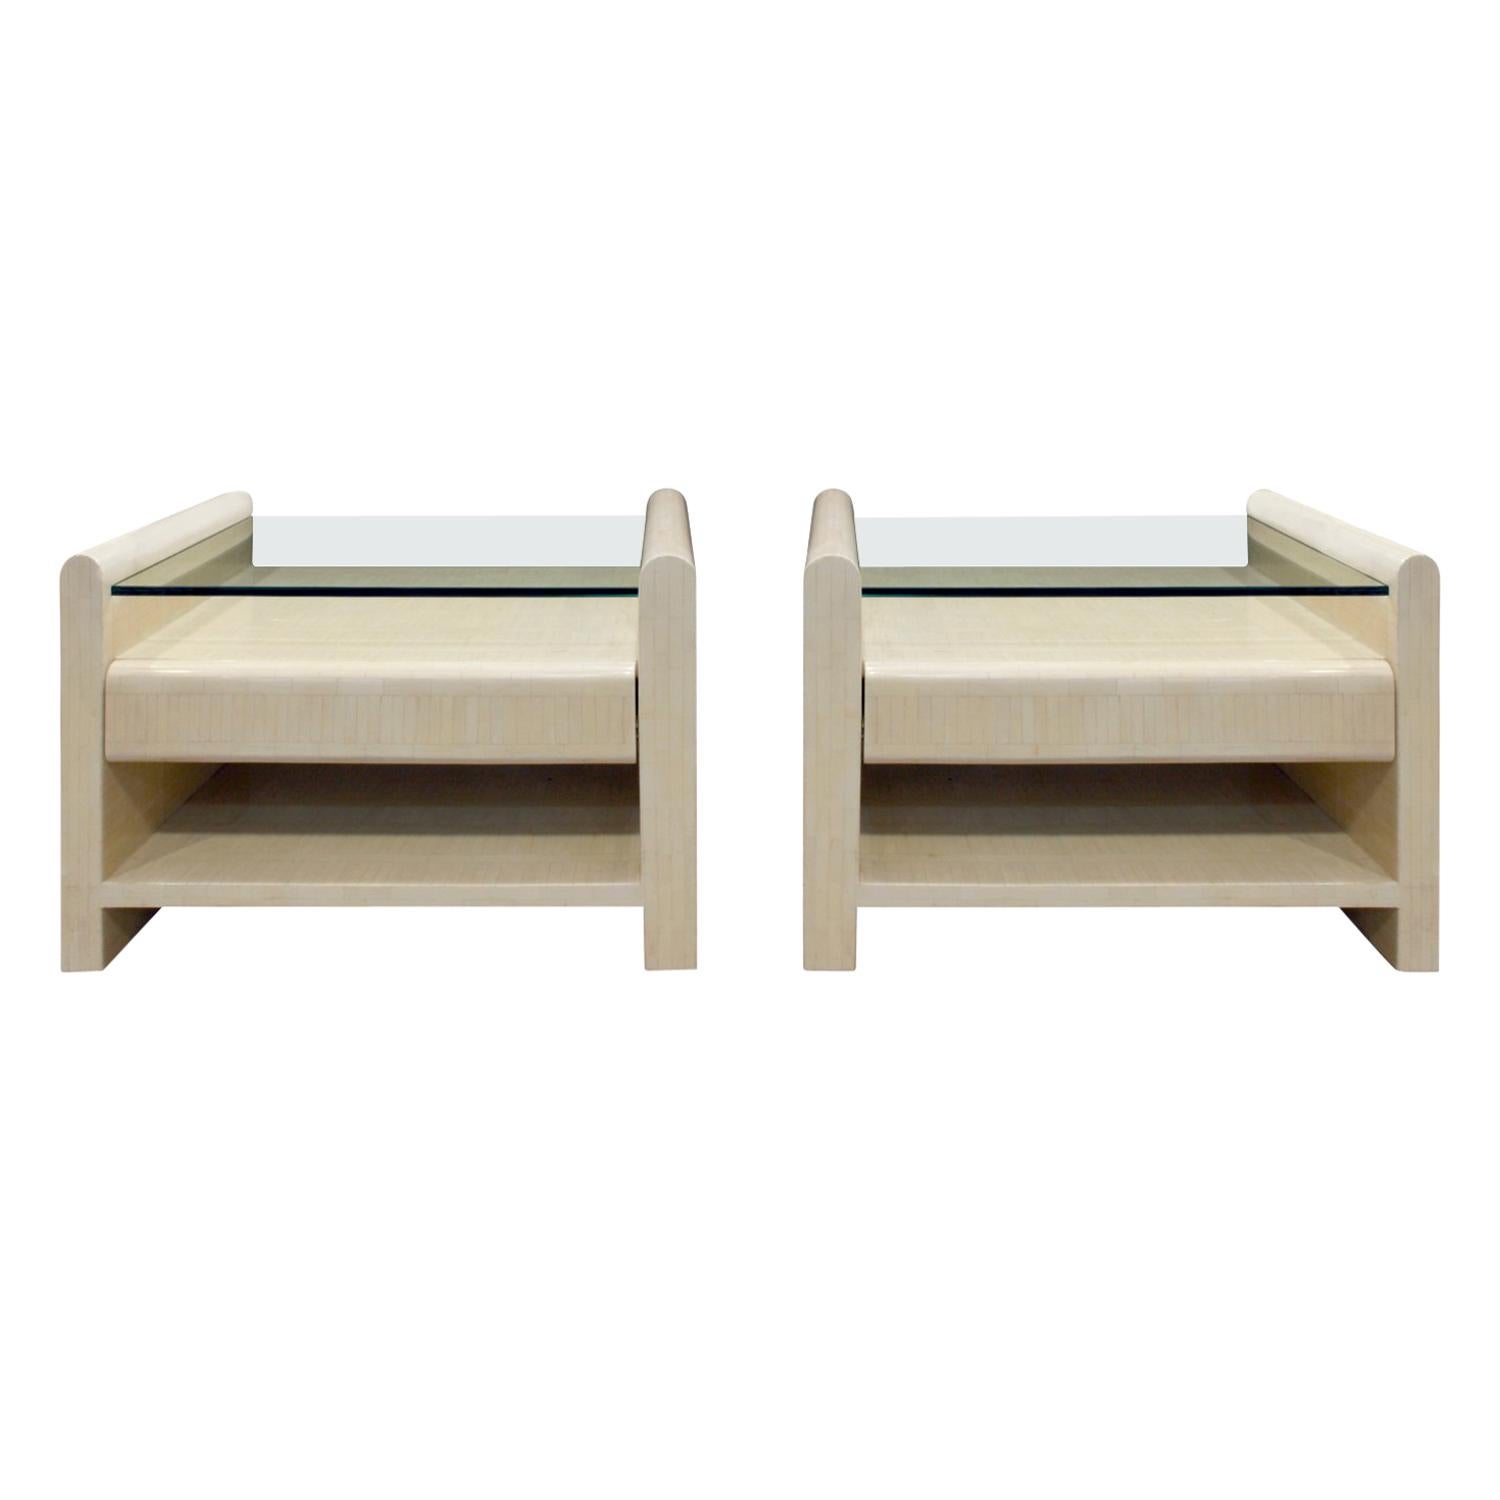 Pair of Bedside Tables in Lacquered Tesselated Bone, 1970s